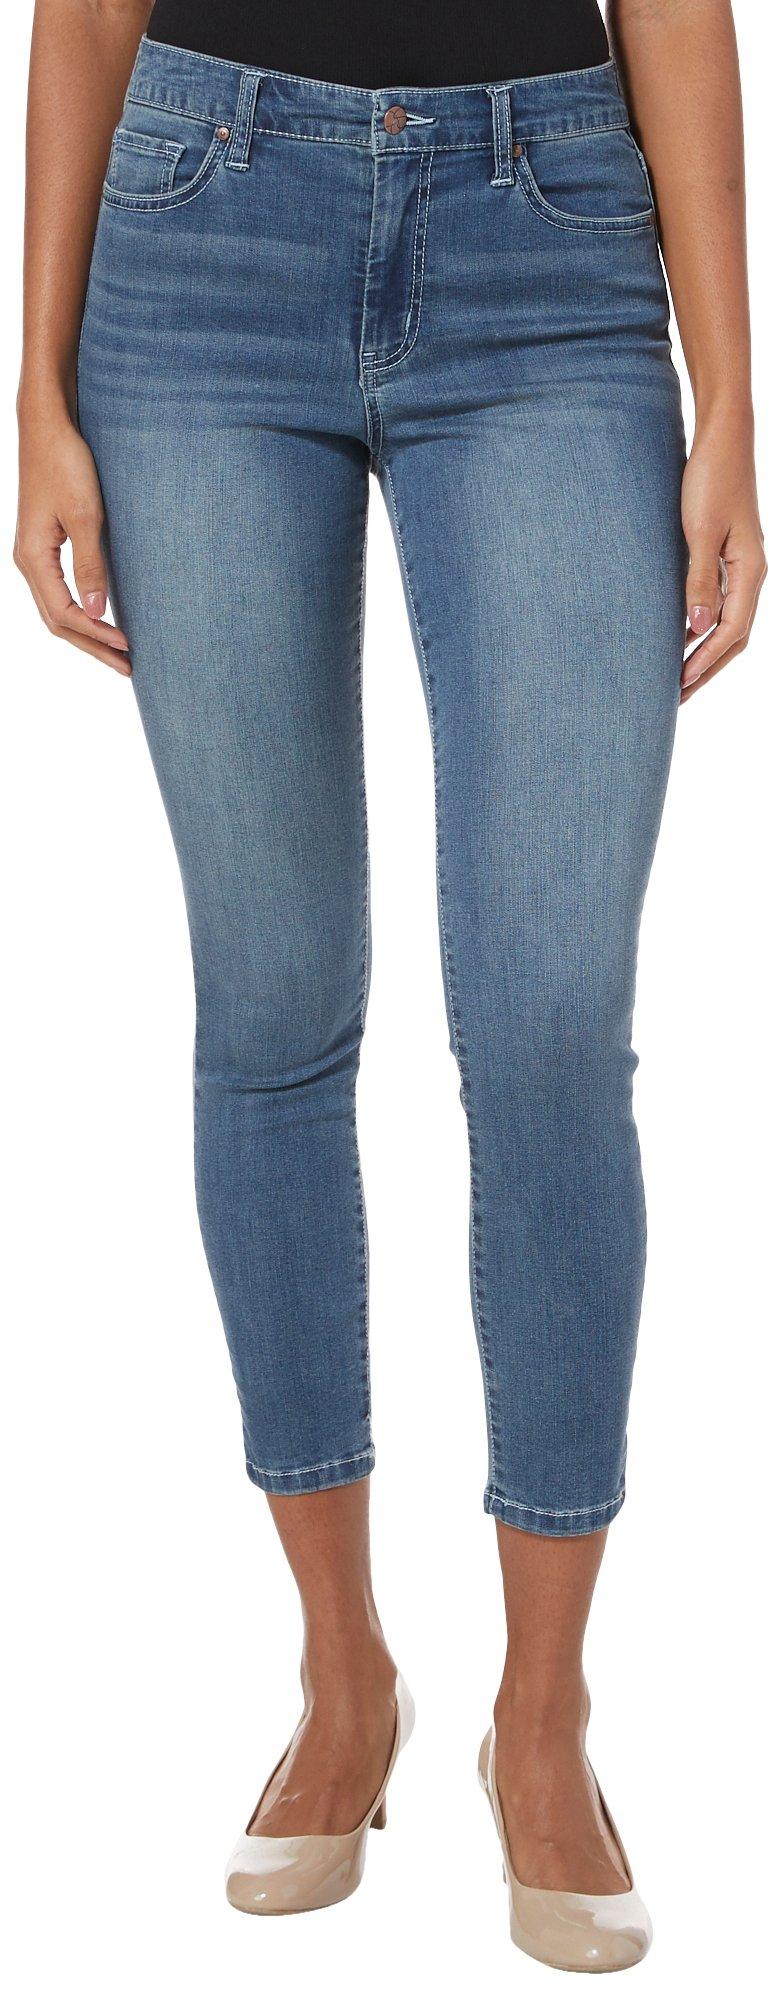 Jessica Simpson Womens Adored High Rise Ankle Skinny Jeans | Bealls Florida